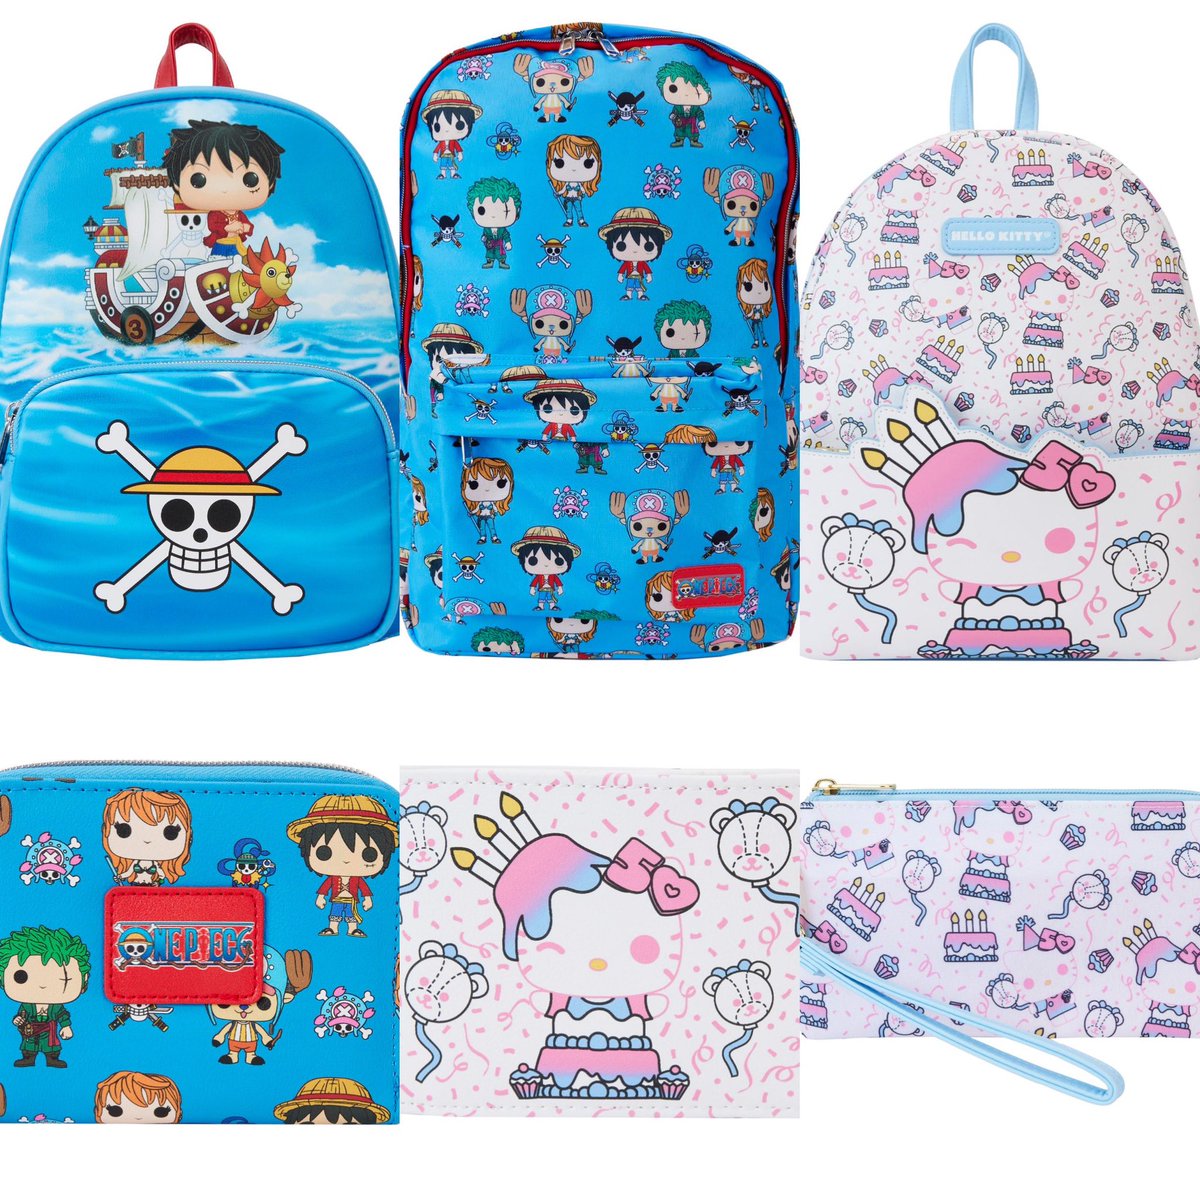 Preorder Now: One Piece & Hello Kitty Backpacks & Wallets at Entertainment Earth! #Ad #OnePiece #HelloKitty
.
entertainmentearth.com/s/?query1=Funk…
.
#Funko #FunkoPop #FunkoPopVinyl #Pop #PopVinyl #Collectibles #Collectible #FunkoCollector #FunkoPops #Collector #Toy #Toys #DisTrackers